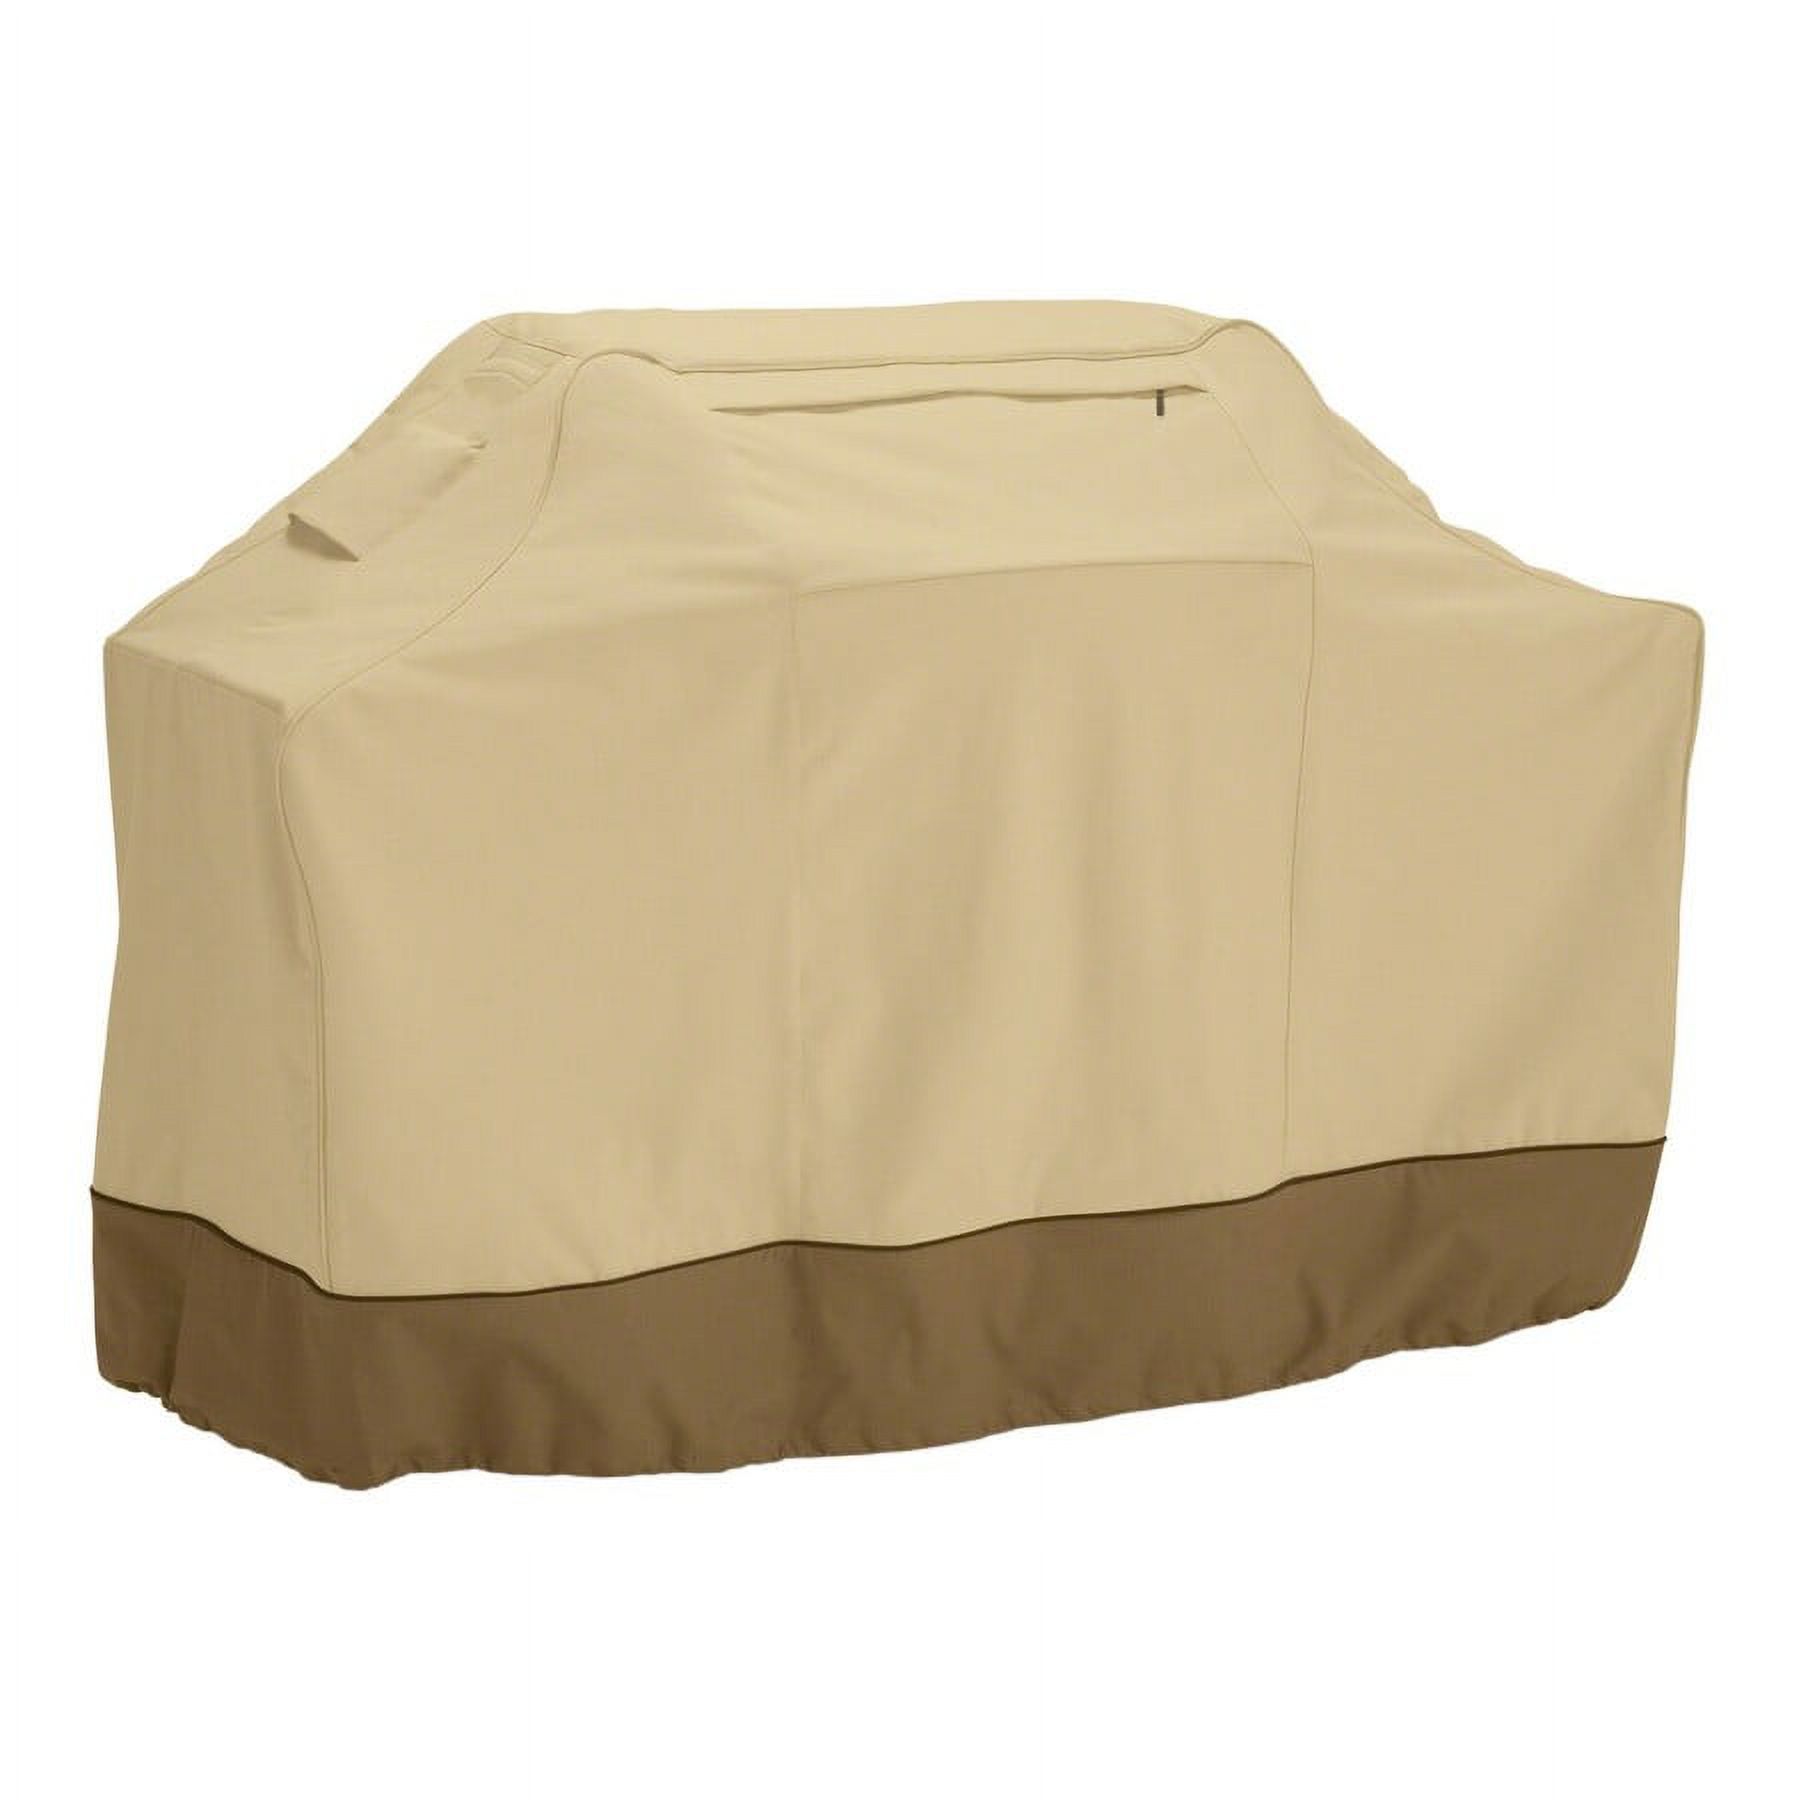 Classic Accessories Veranda Barbecue BBQ Grill Patio Storage Cover, Up to 70" Wide, X-Large - image 4 of 11